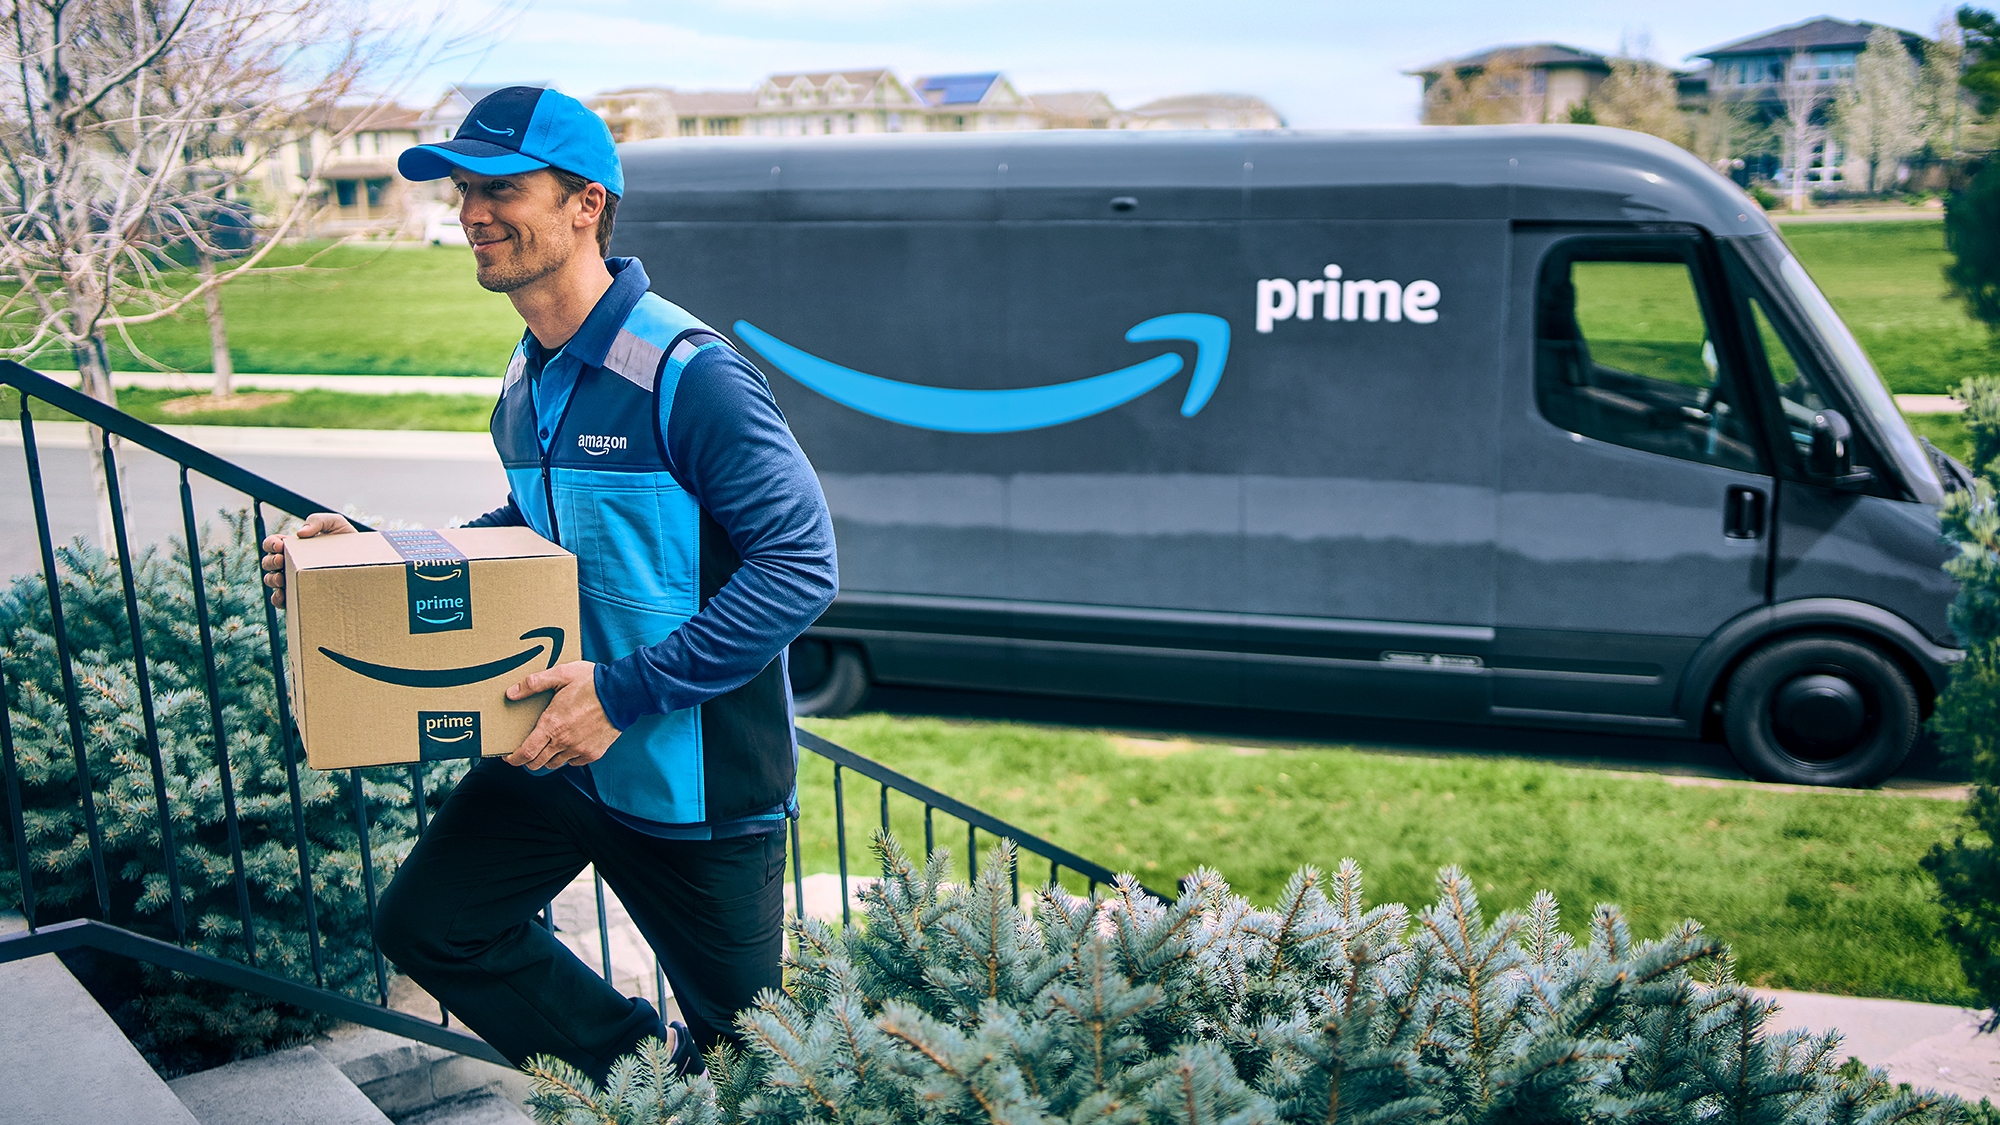 Amazon Prime delivery driver walks up the steps to deliver a package with his Prime delivery van in the background.